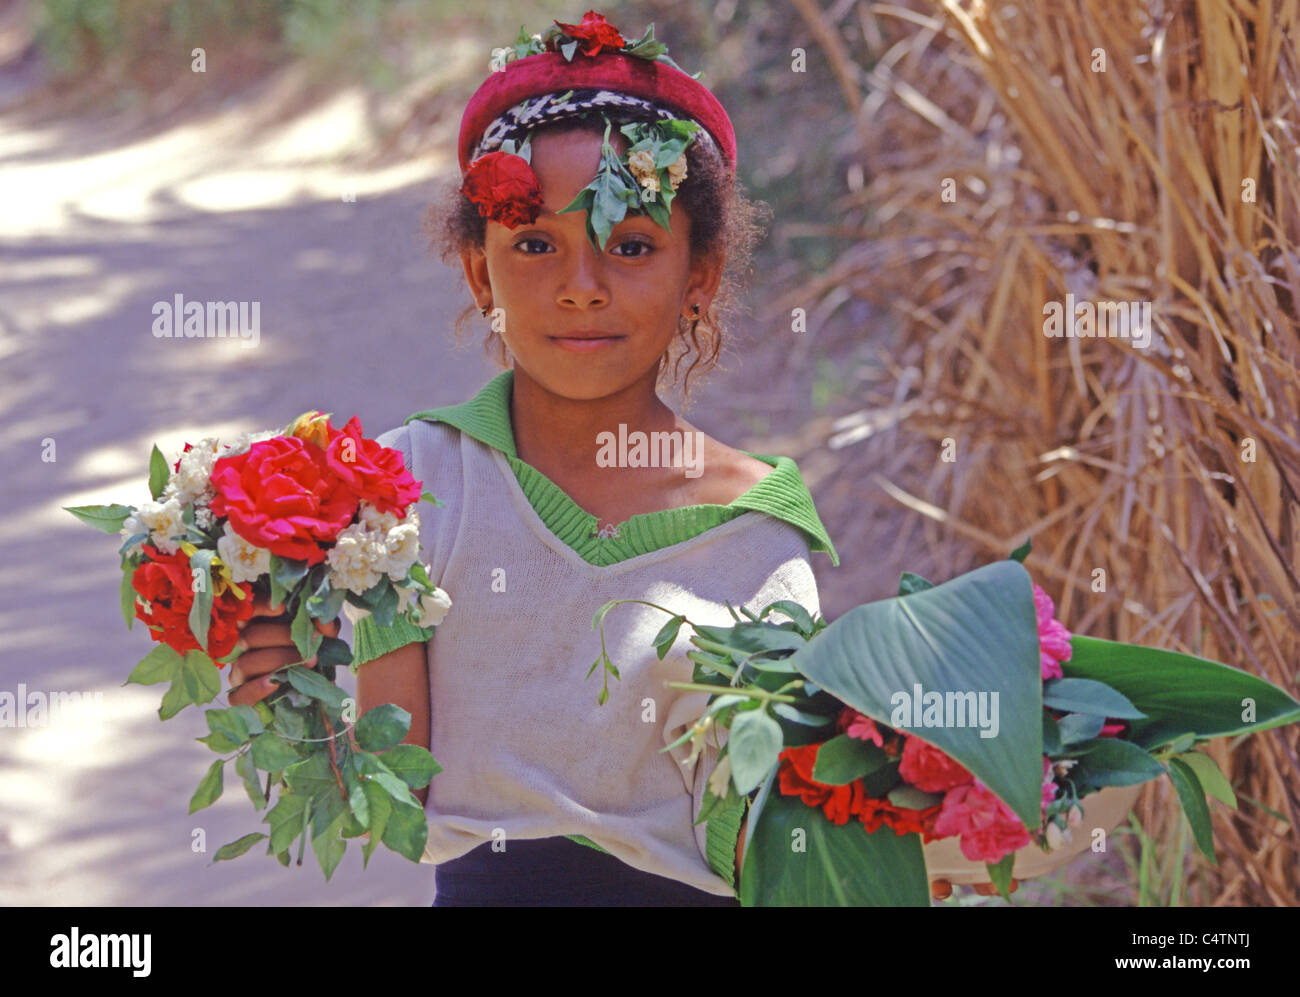 Tunisian Girl flower seller at Oasis in Southern Tunisia Stock Photo